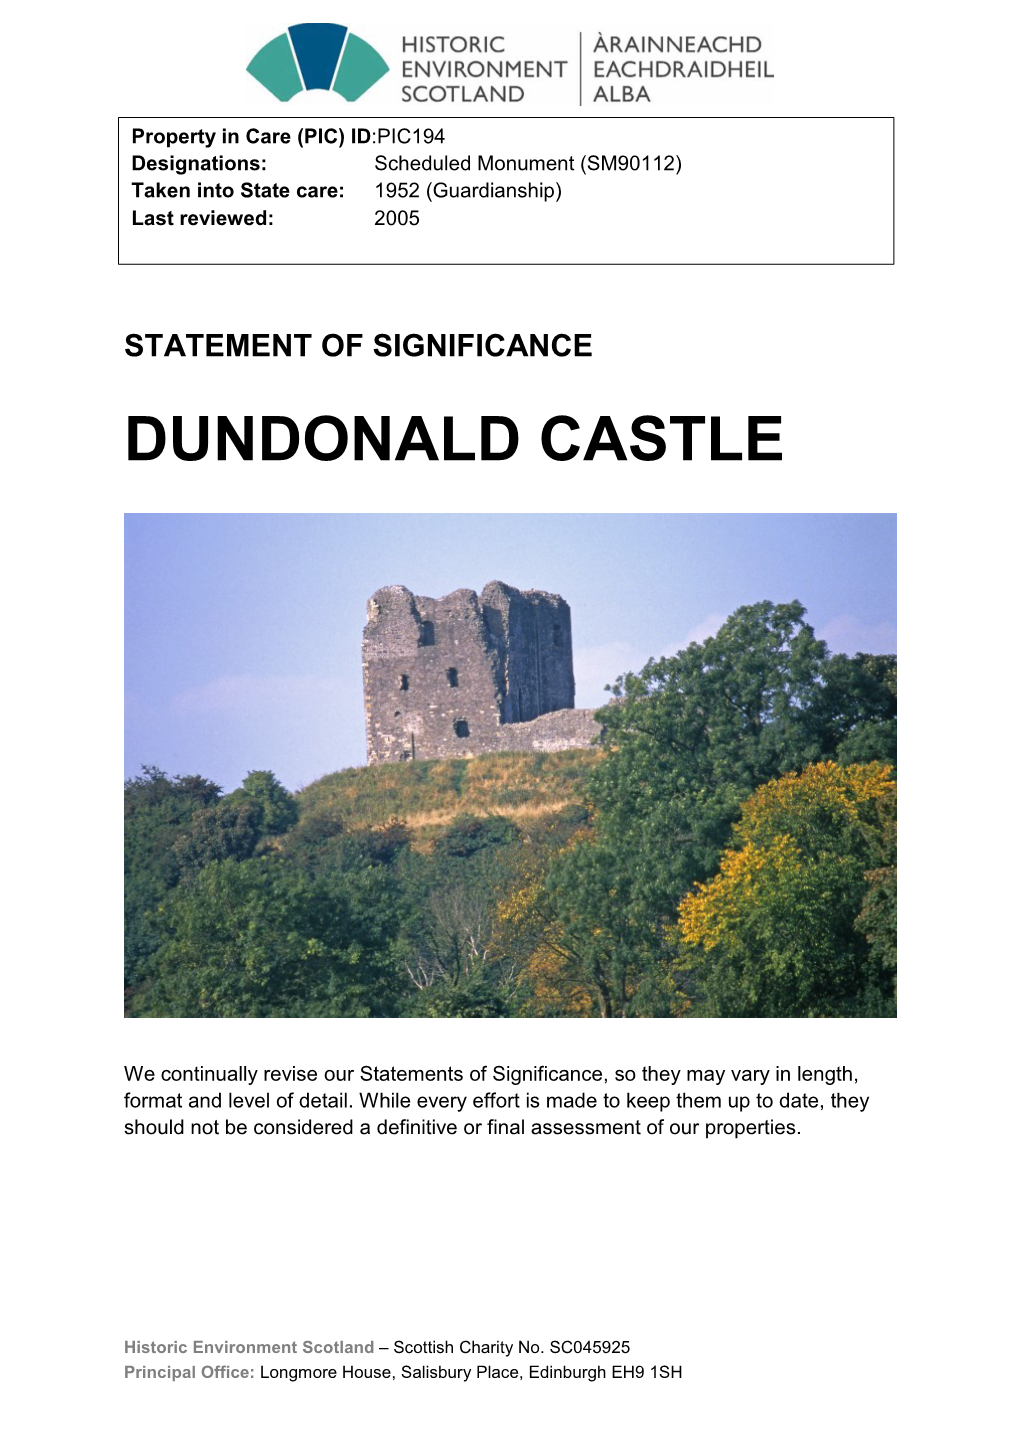 Dundonald Castle Statement of Significance